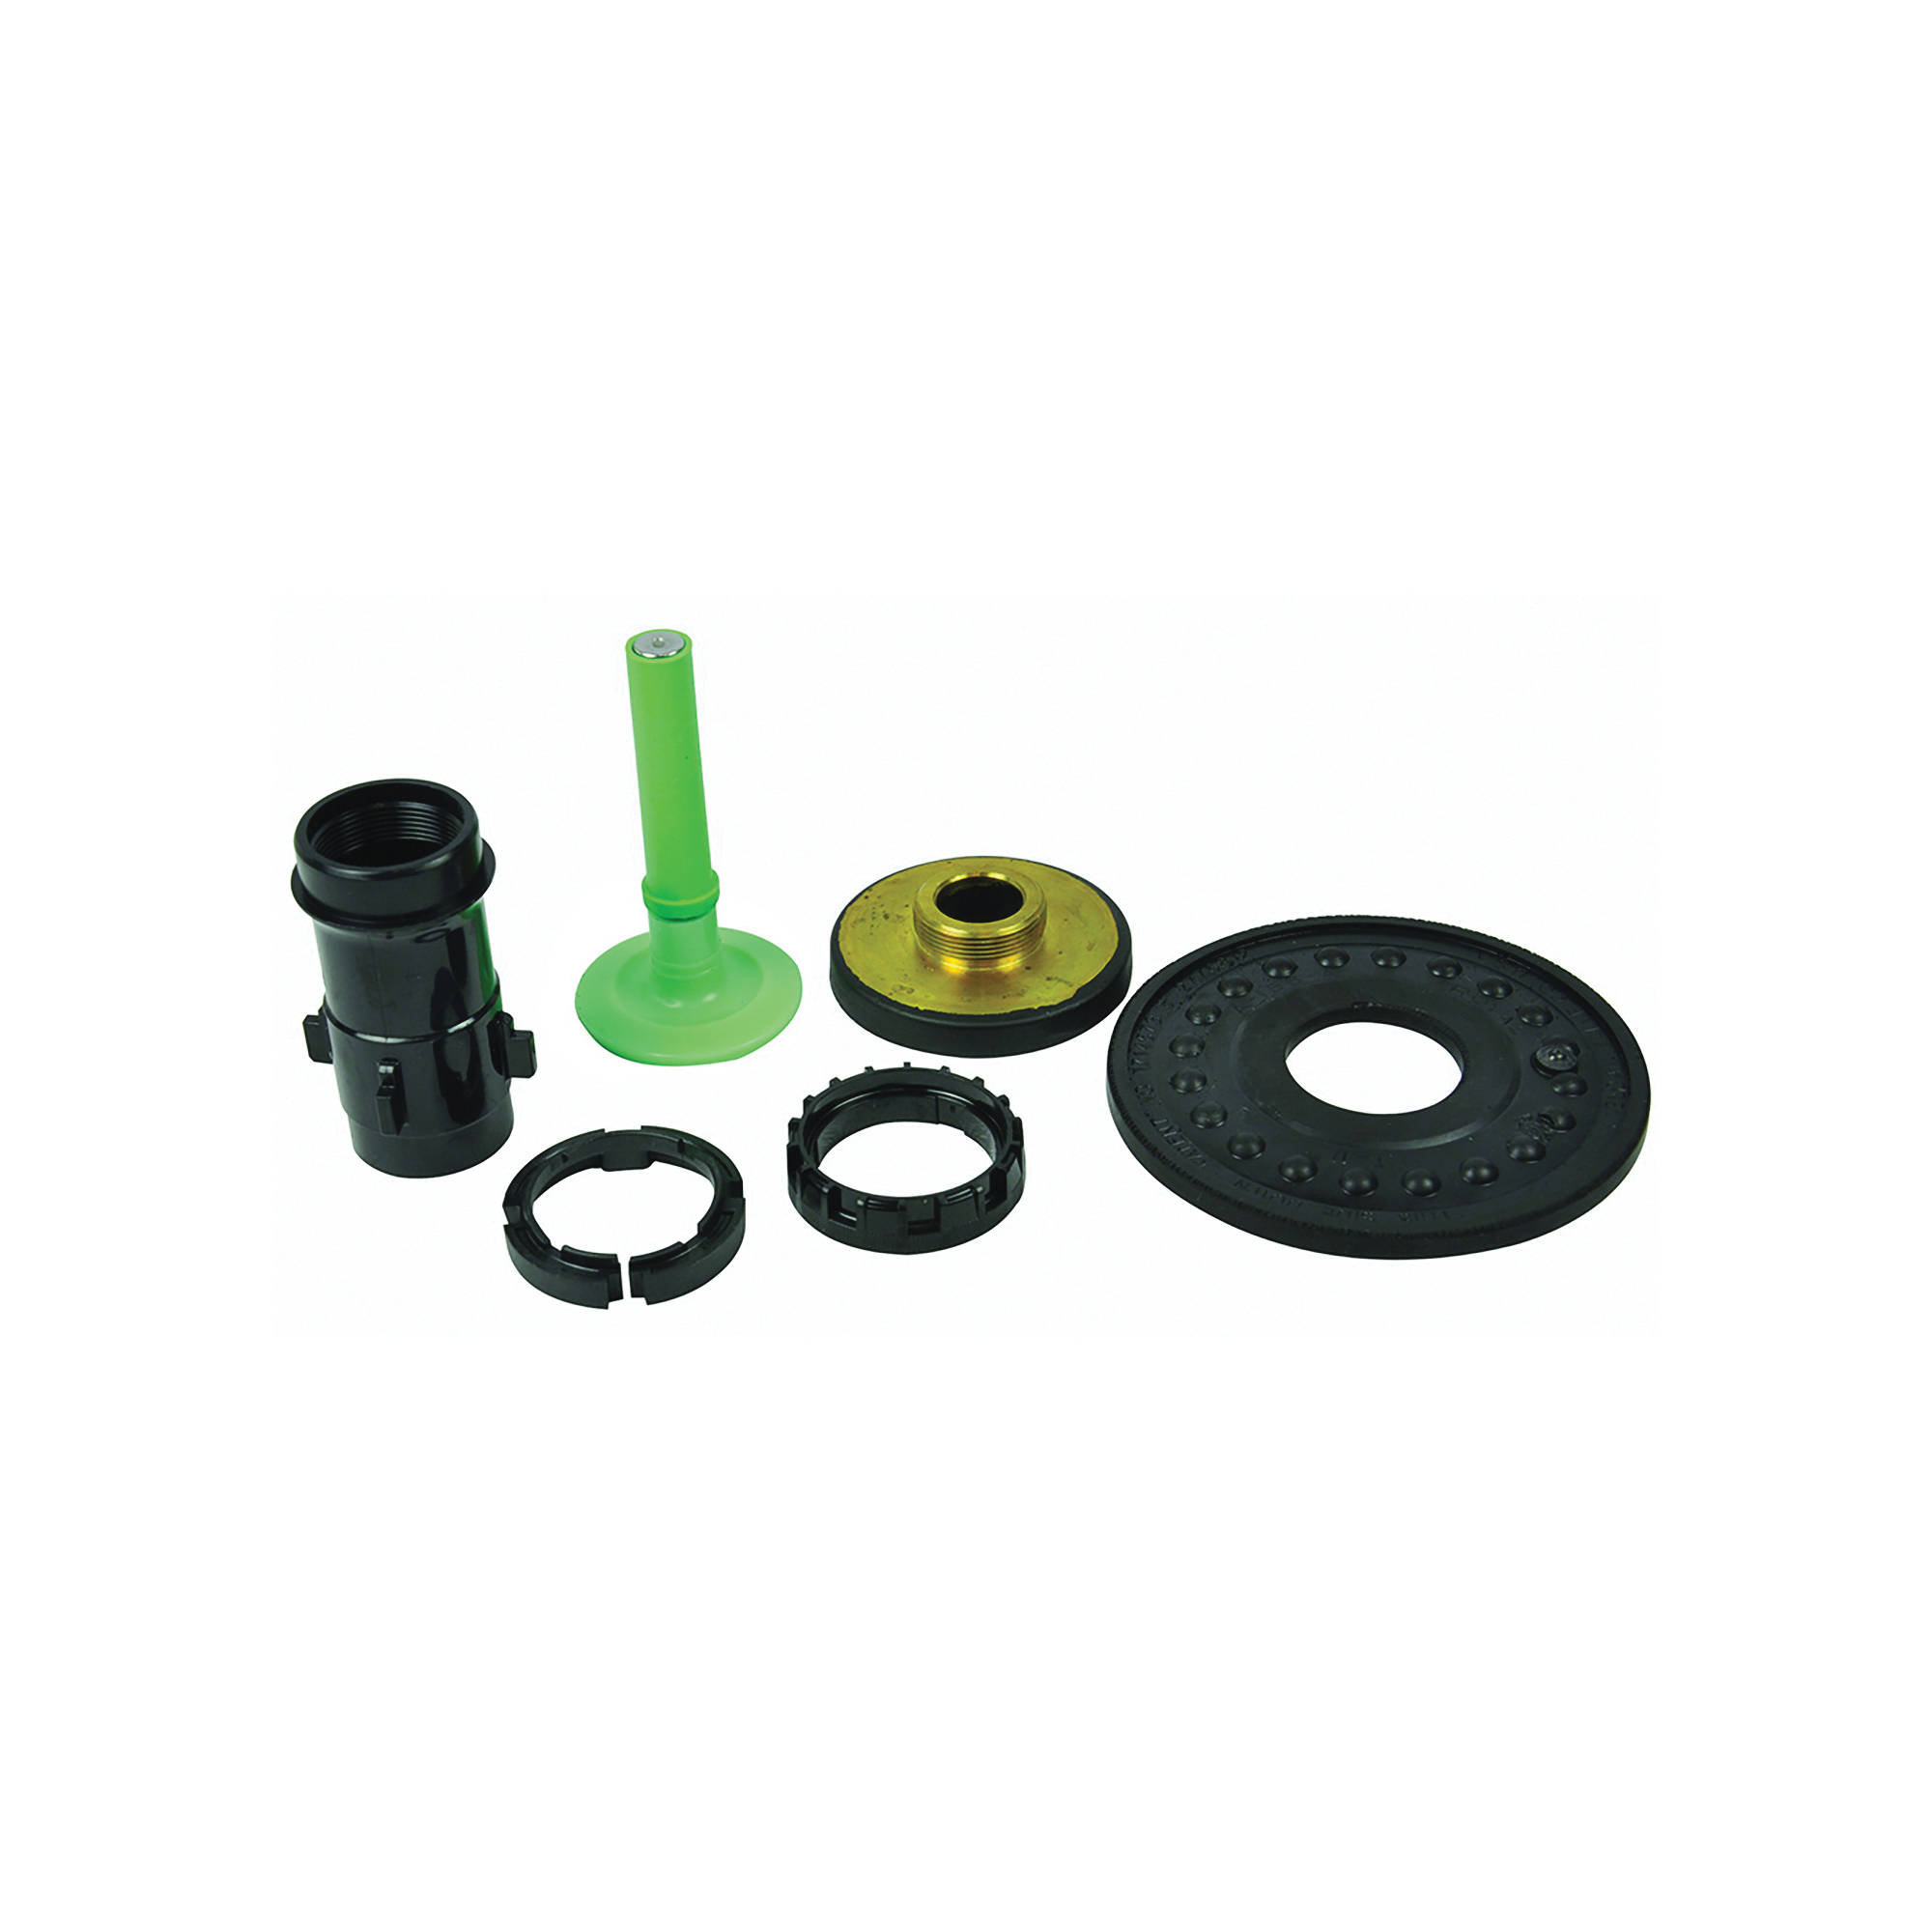 37081 Urinal Kit, For: All Diaphragm-Type Exposed or Concealed Regal Valves and Pre-1997 Royal Valves